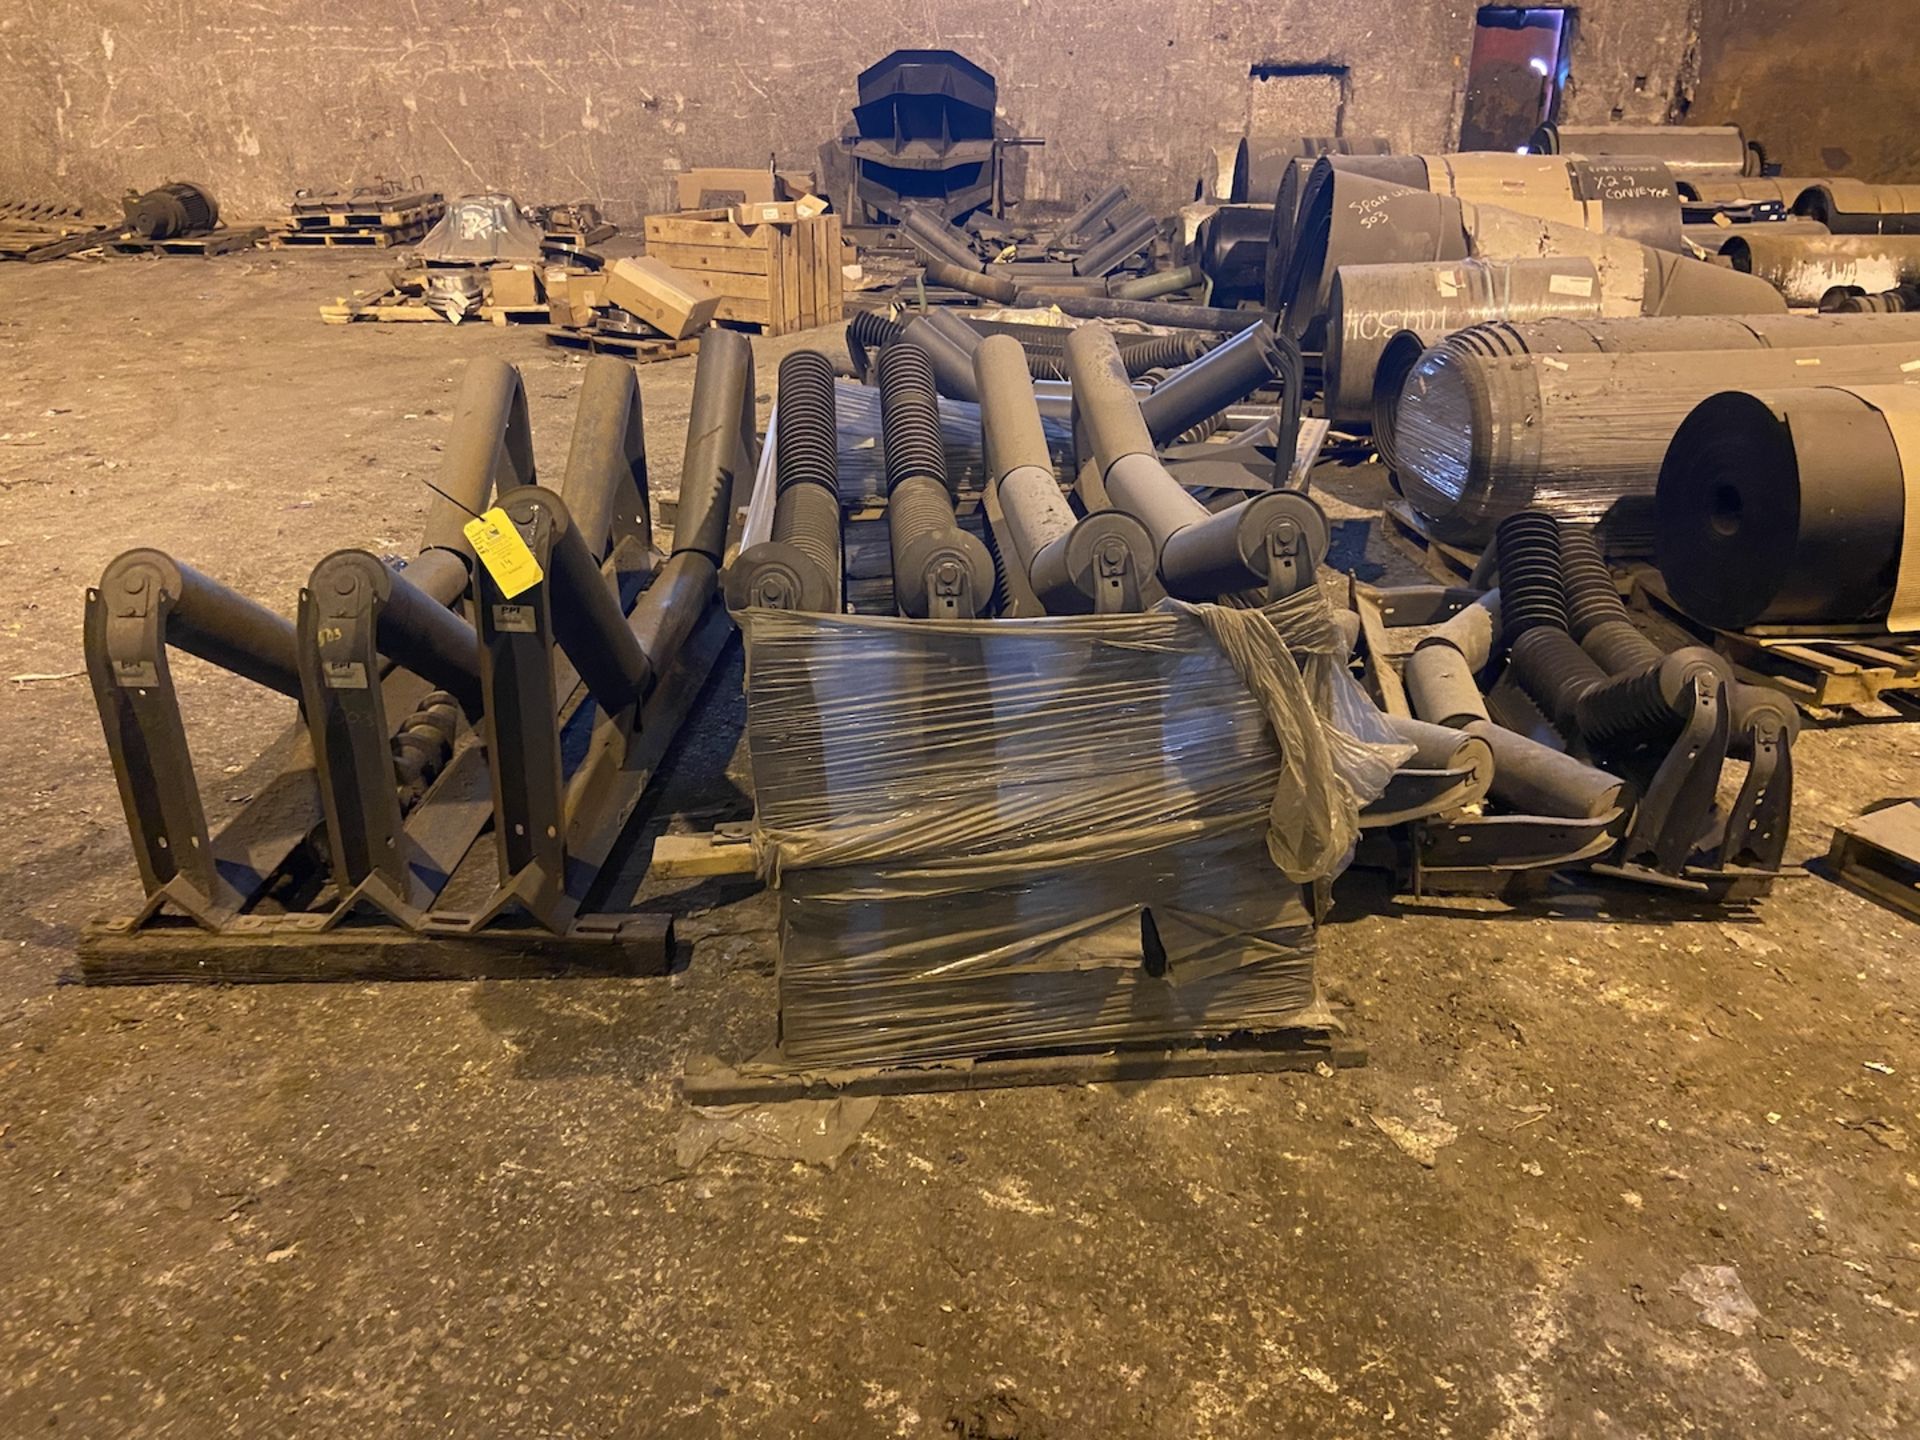 Conveyor Spare Parts (All Pictured, No Belts), Rigging/ Removal Fee: $1,000